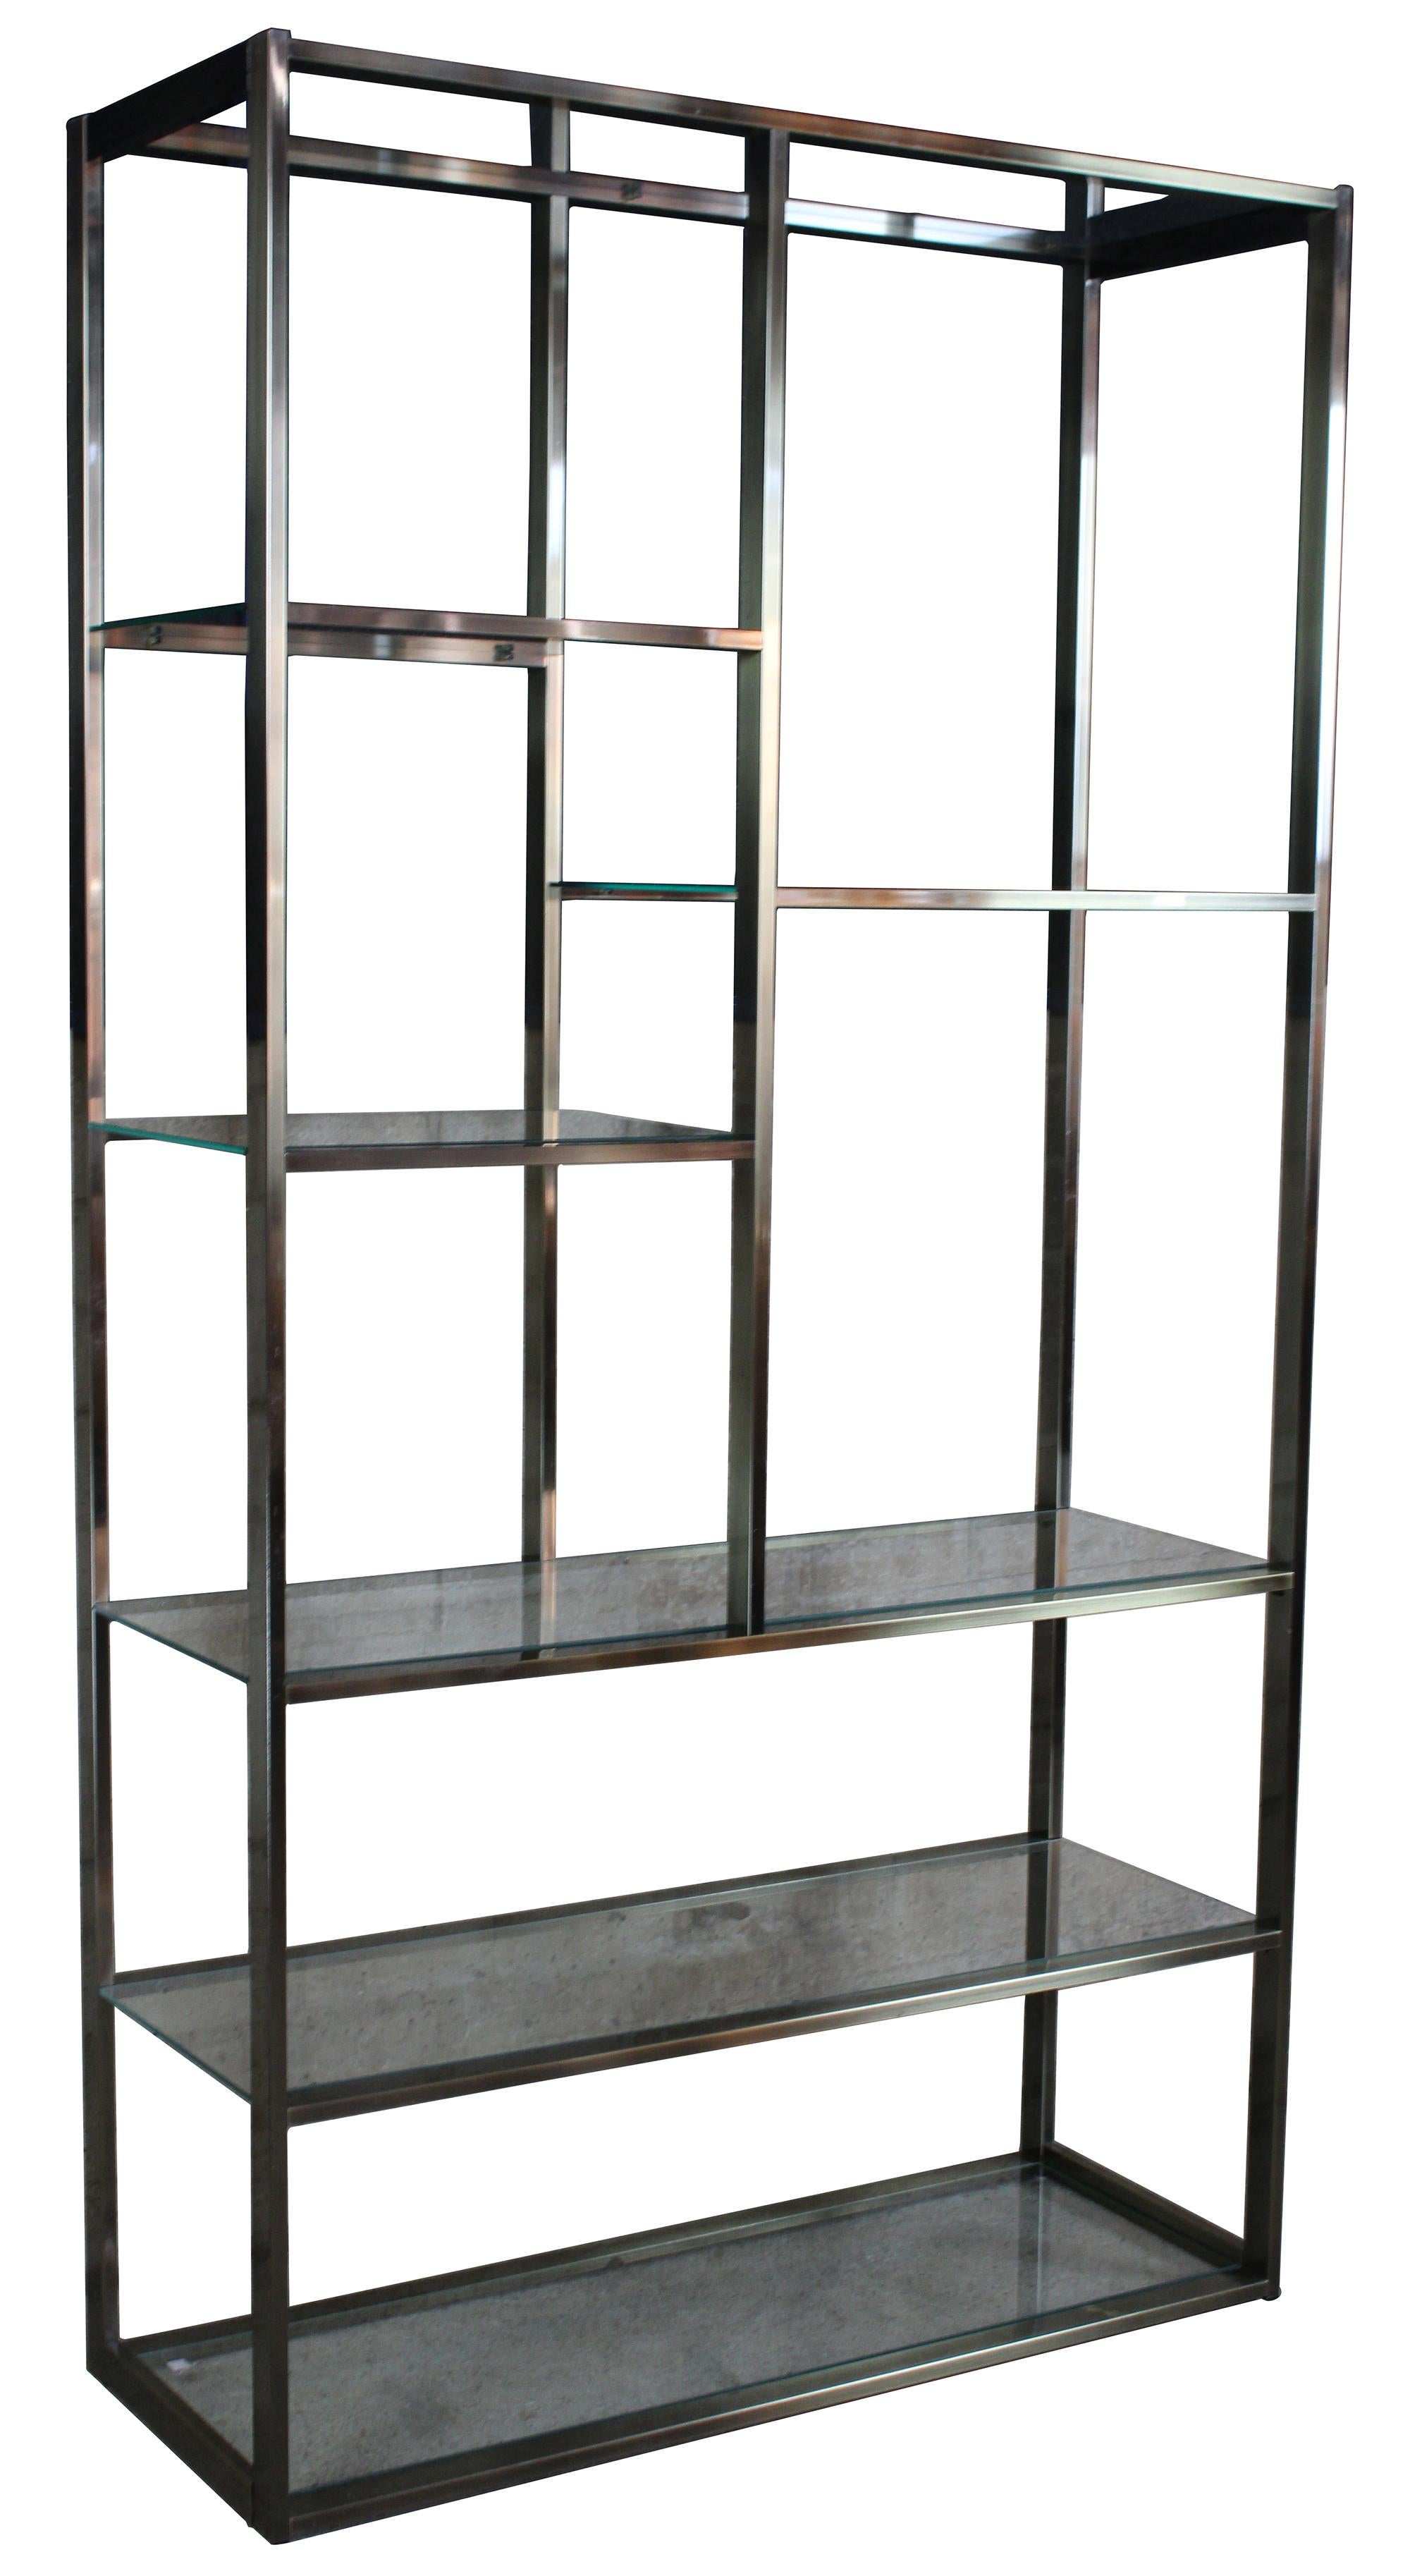 Vintage MCM Labarge chrome and glass étagère or room divider. Features sleek modular design with polished chrome and exposed glass sides.
      